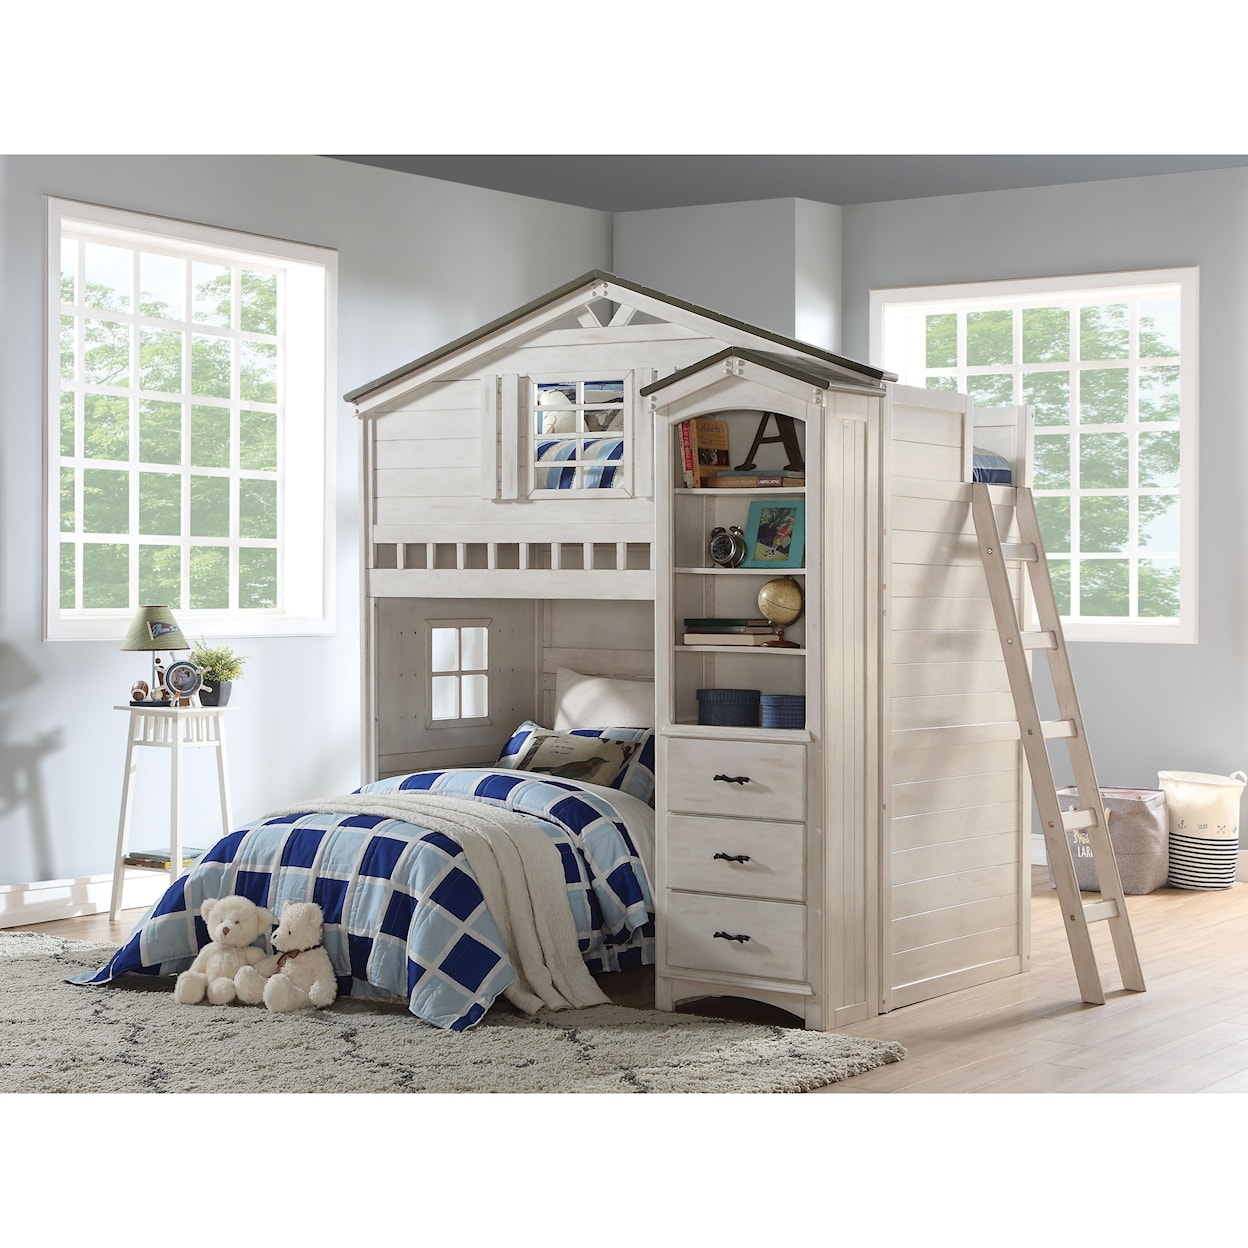 Acme Furniture Tree House Loft Bed (Twin Size)